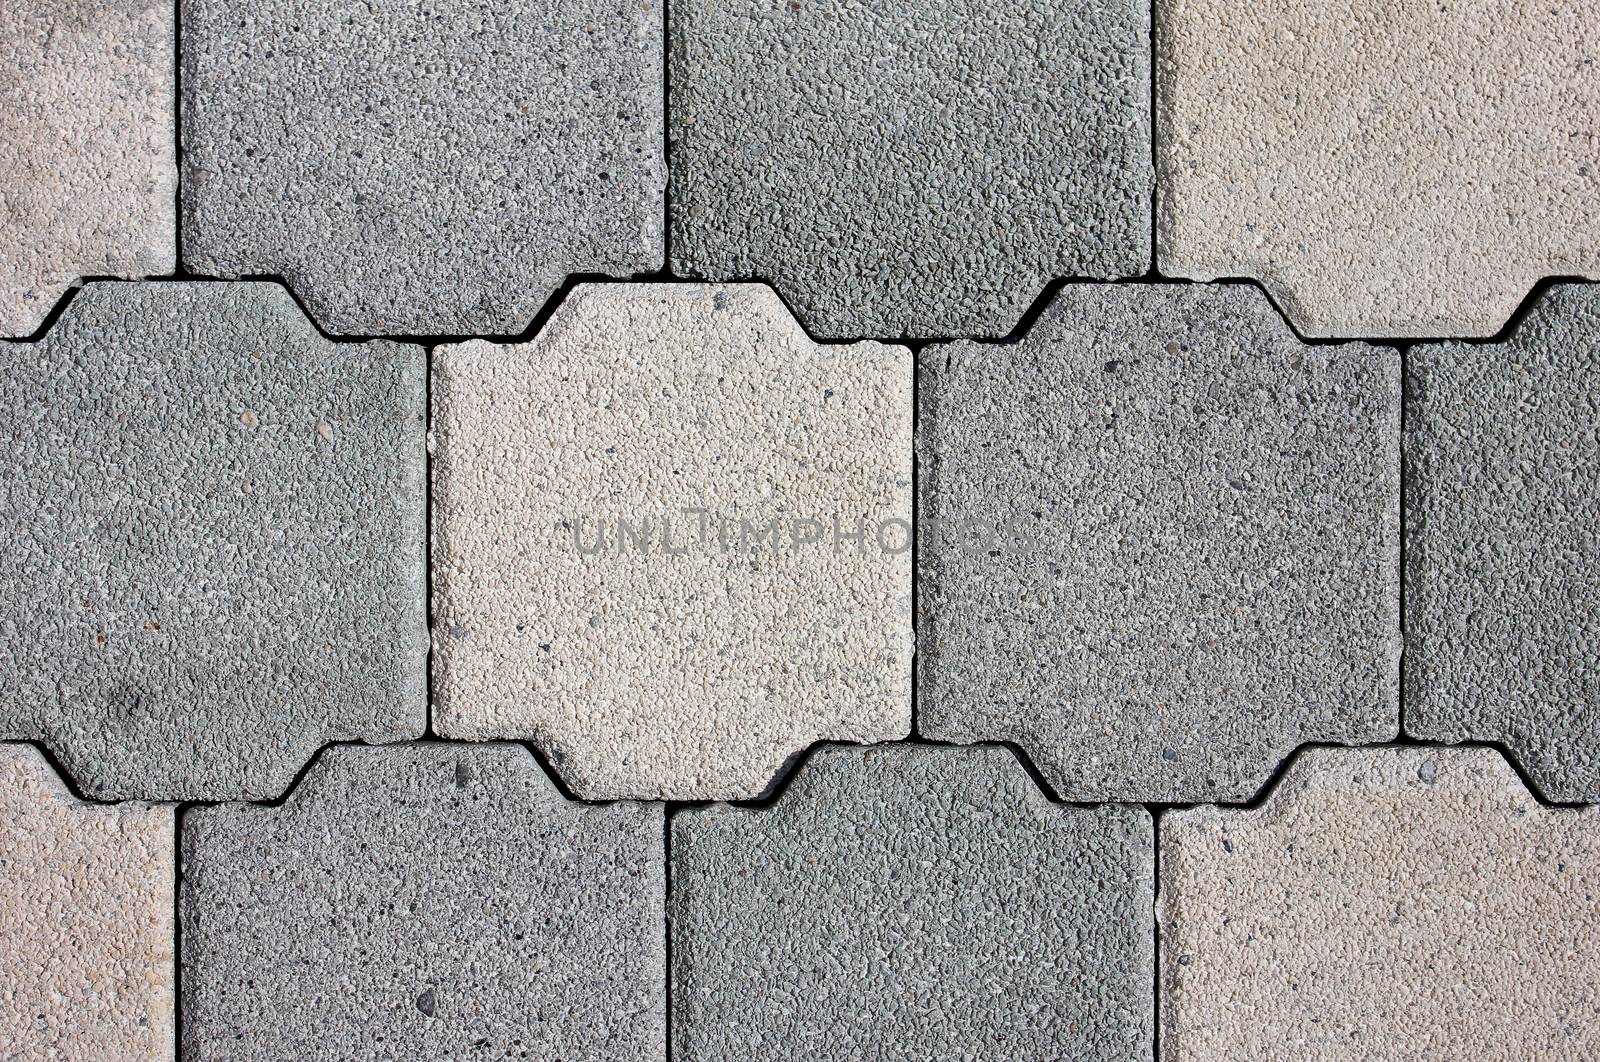 Paving slabs of various forms by Vadimdem